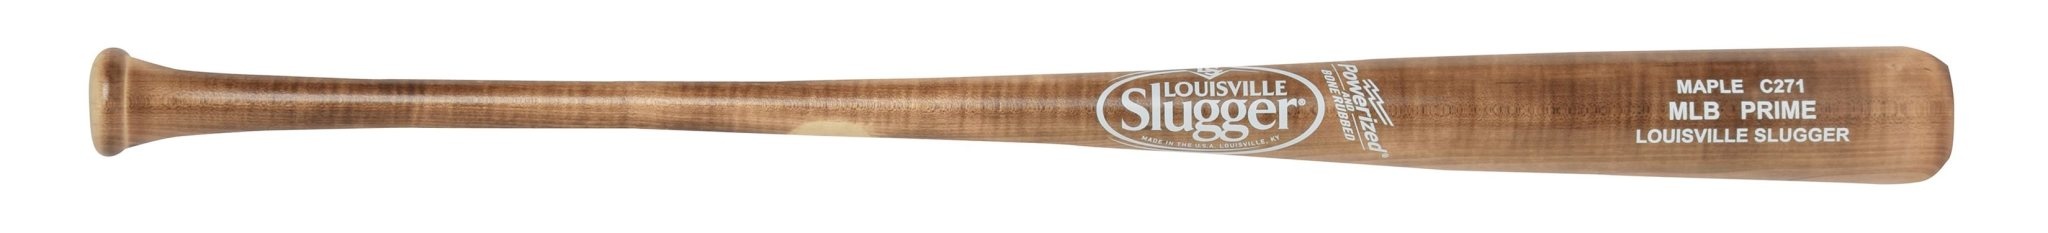 LS WB MLB Prime maple C271 flame treated